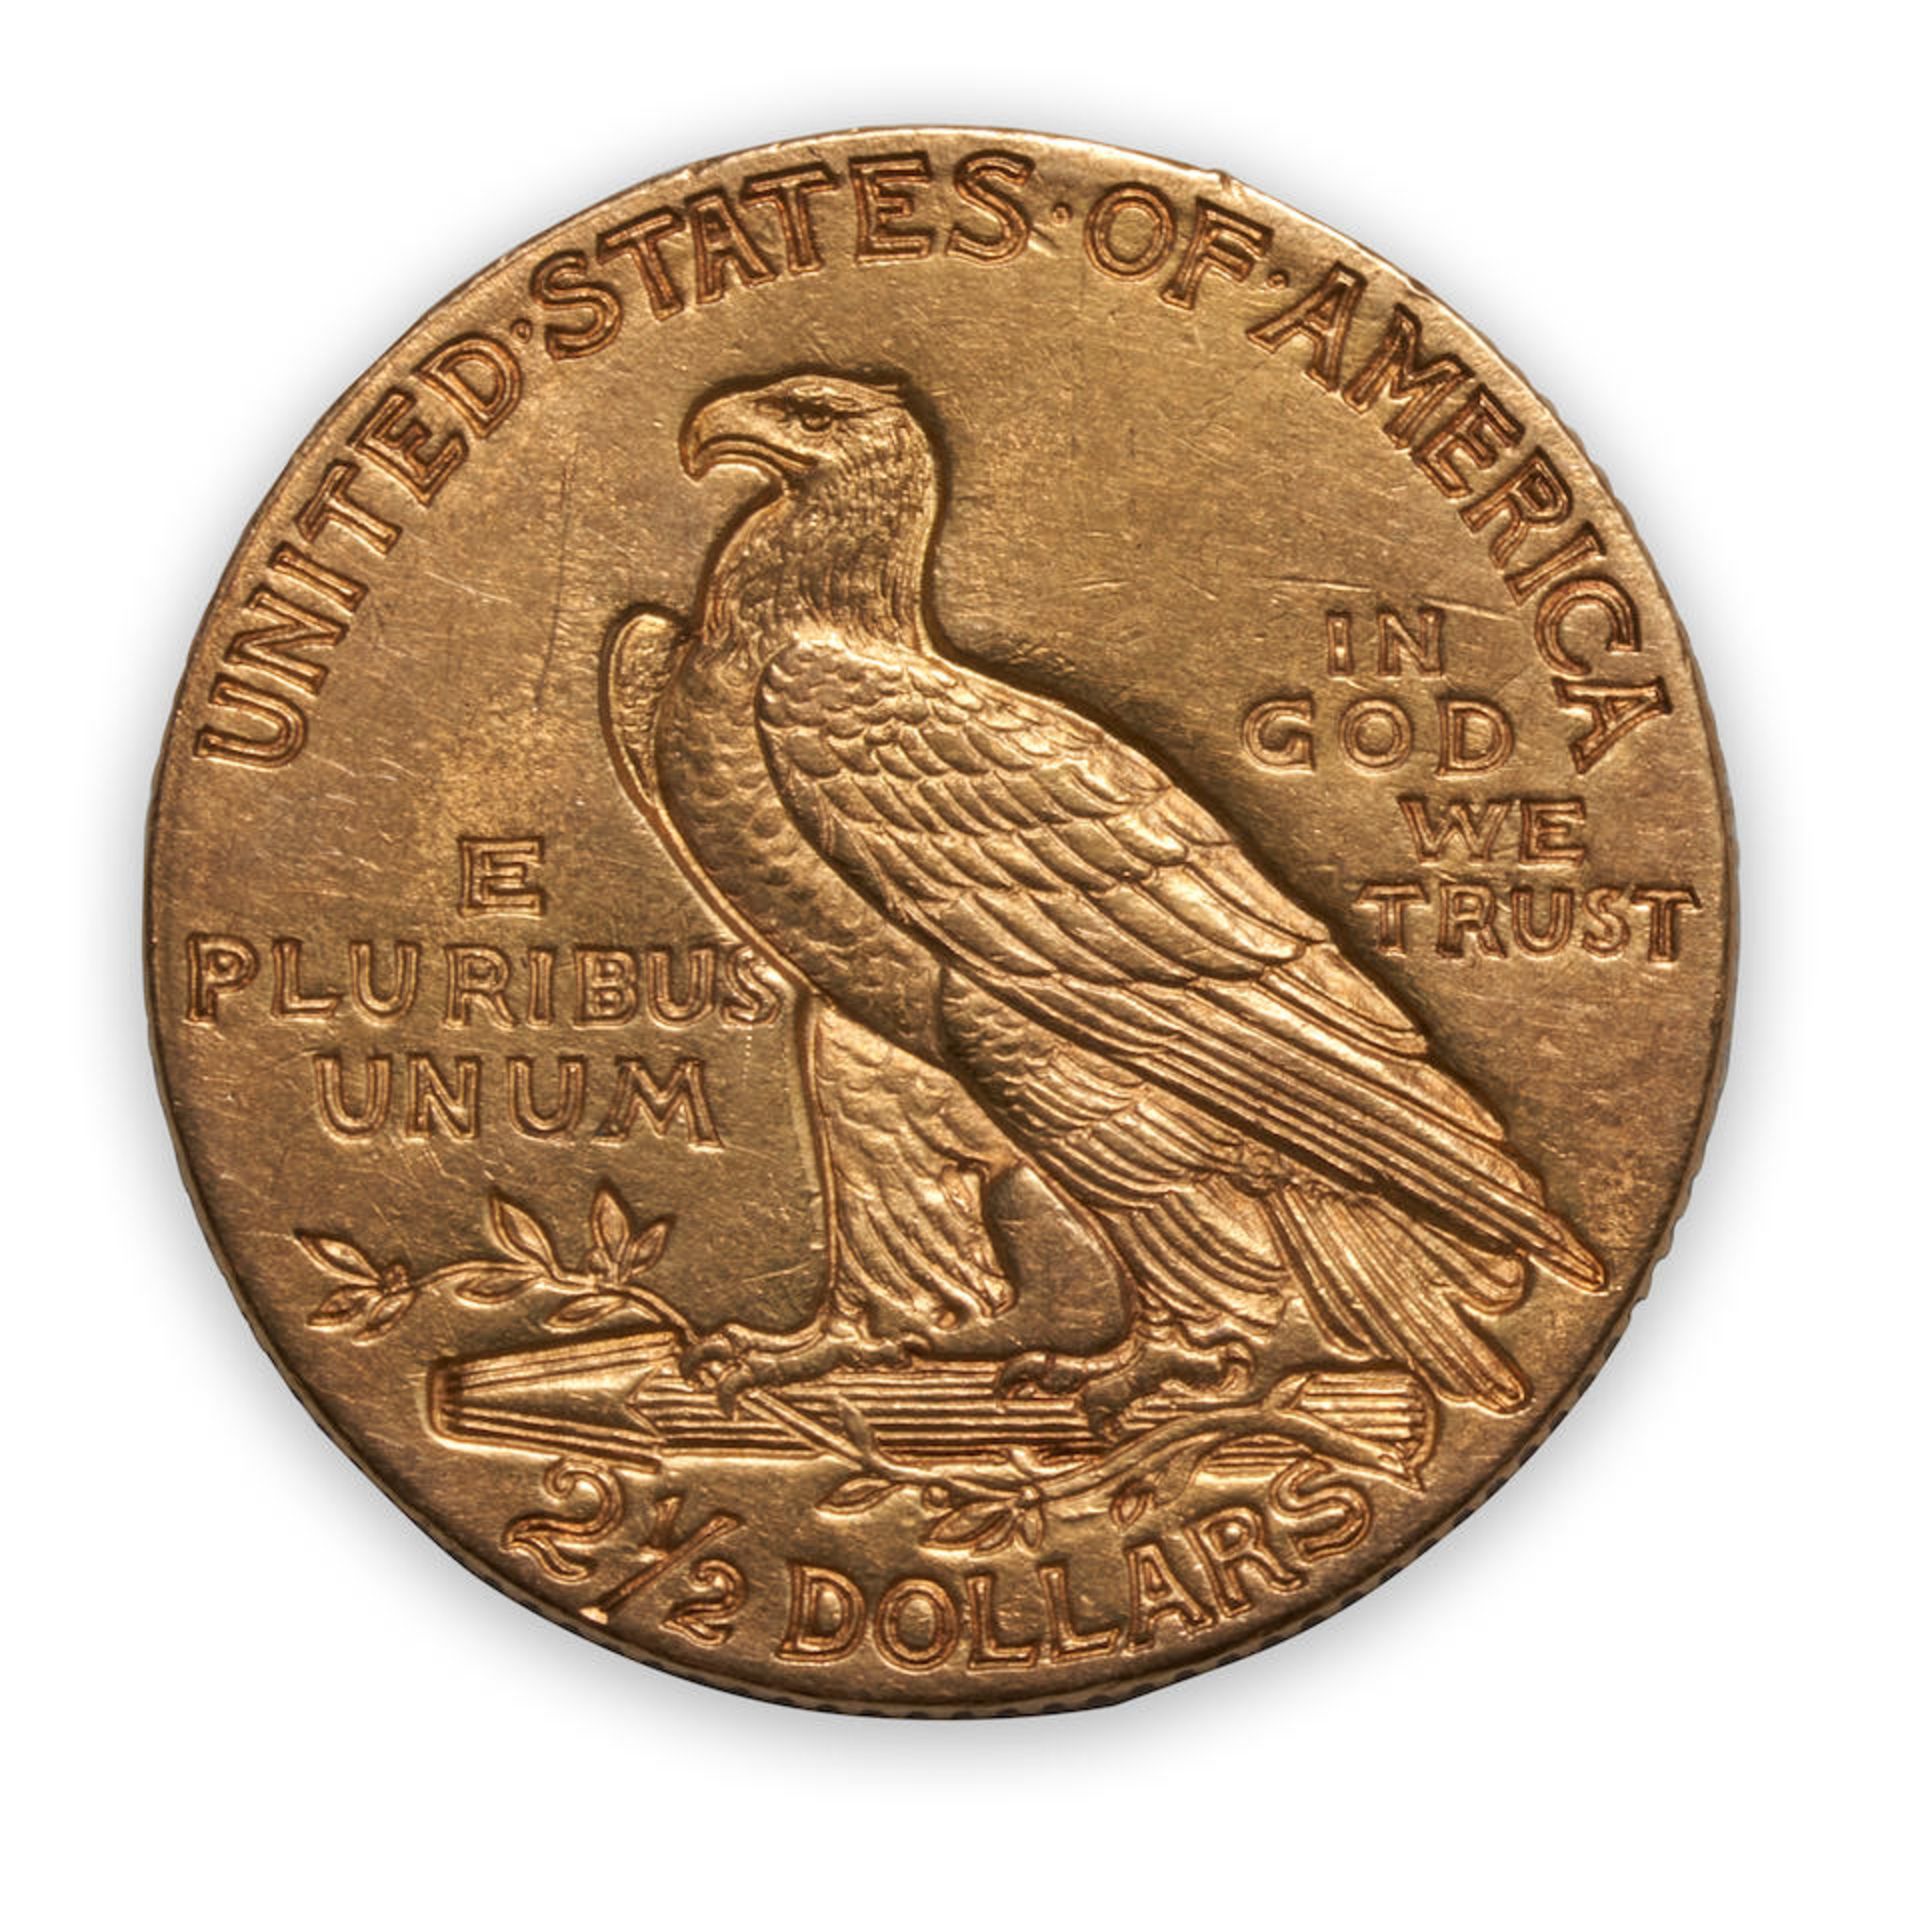 United States Four Indian Head $2.50 Quarter Eagle Gold Coins. - Image 8 of 9